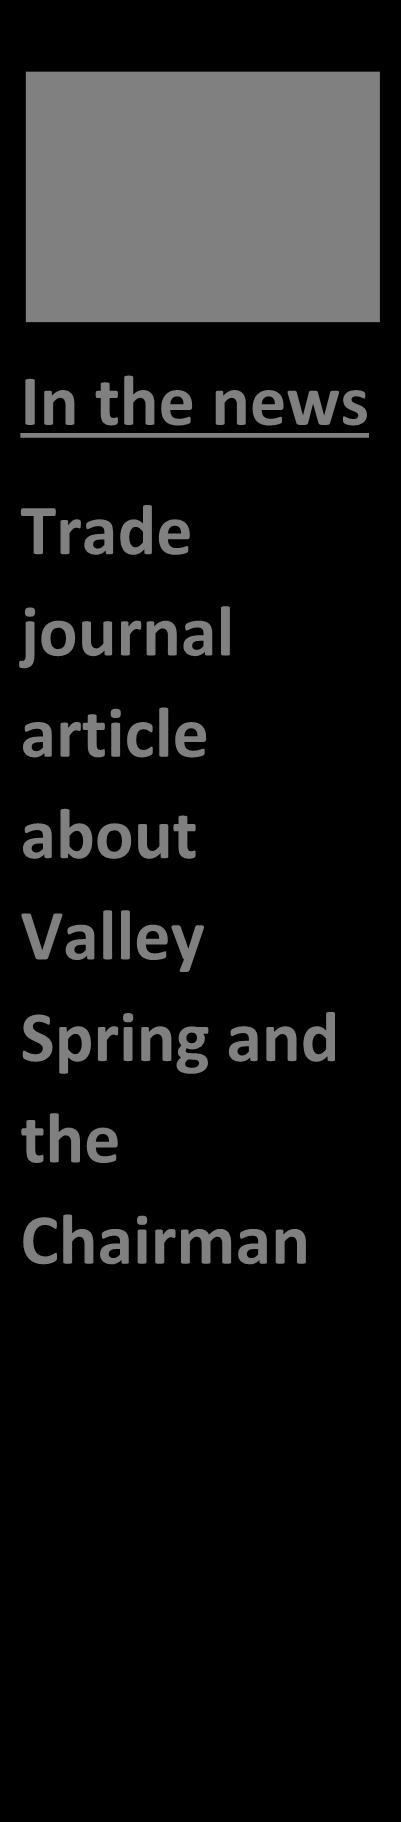 In a recent interview with Samuel Taylor, founder and current Chairman, he stated that Valley Spring started out as a bit of an experiment 25 years ago.